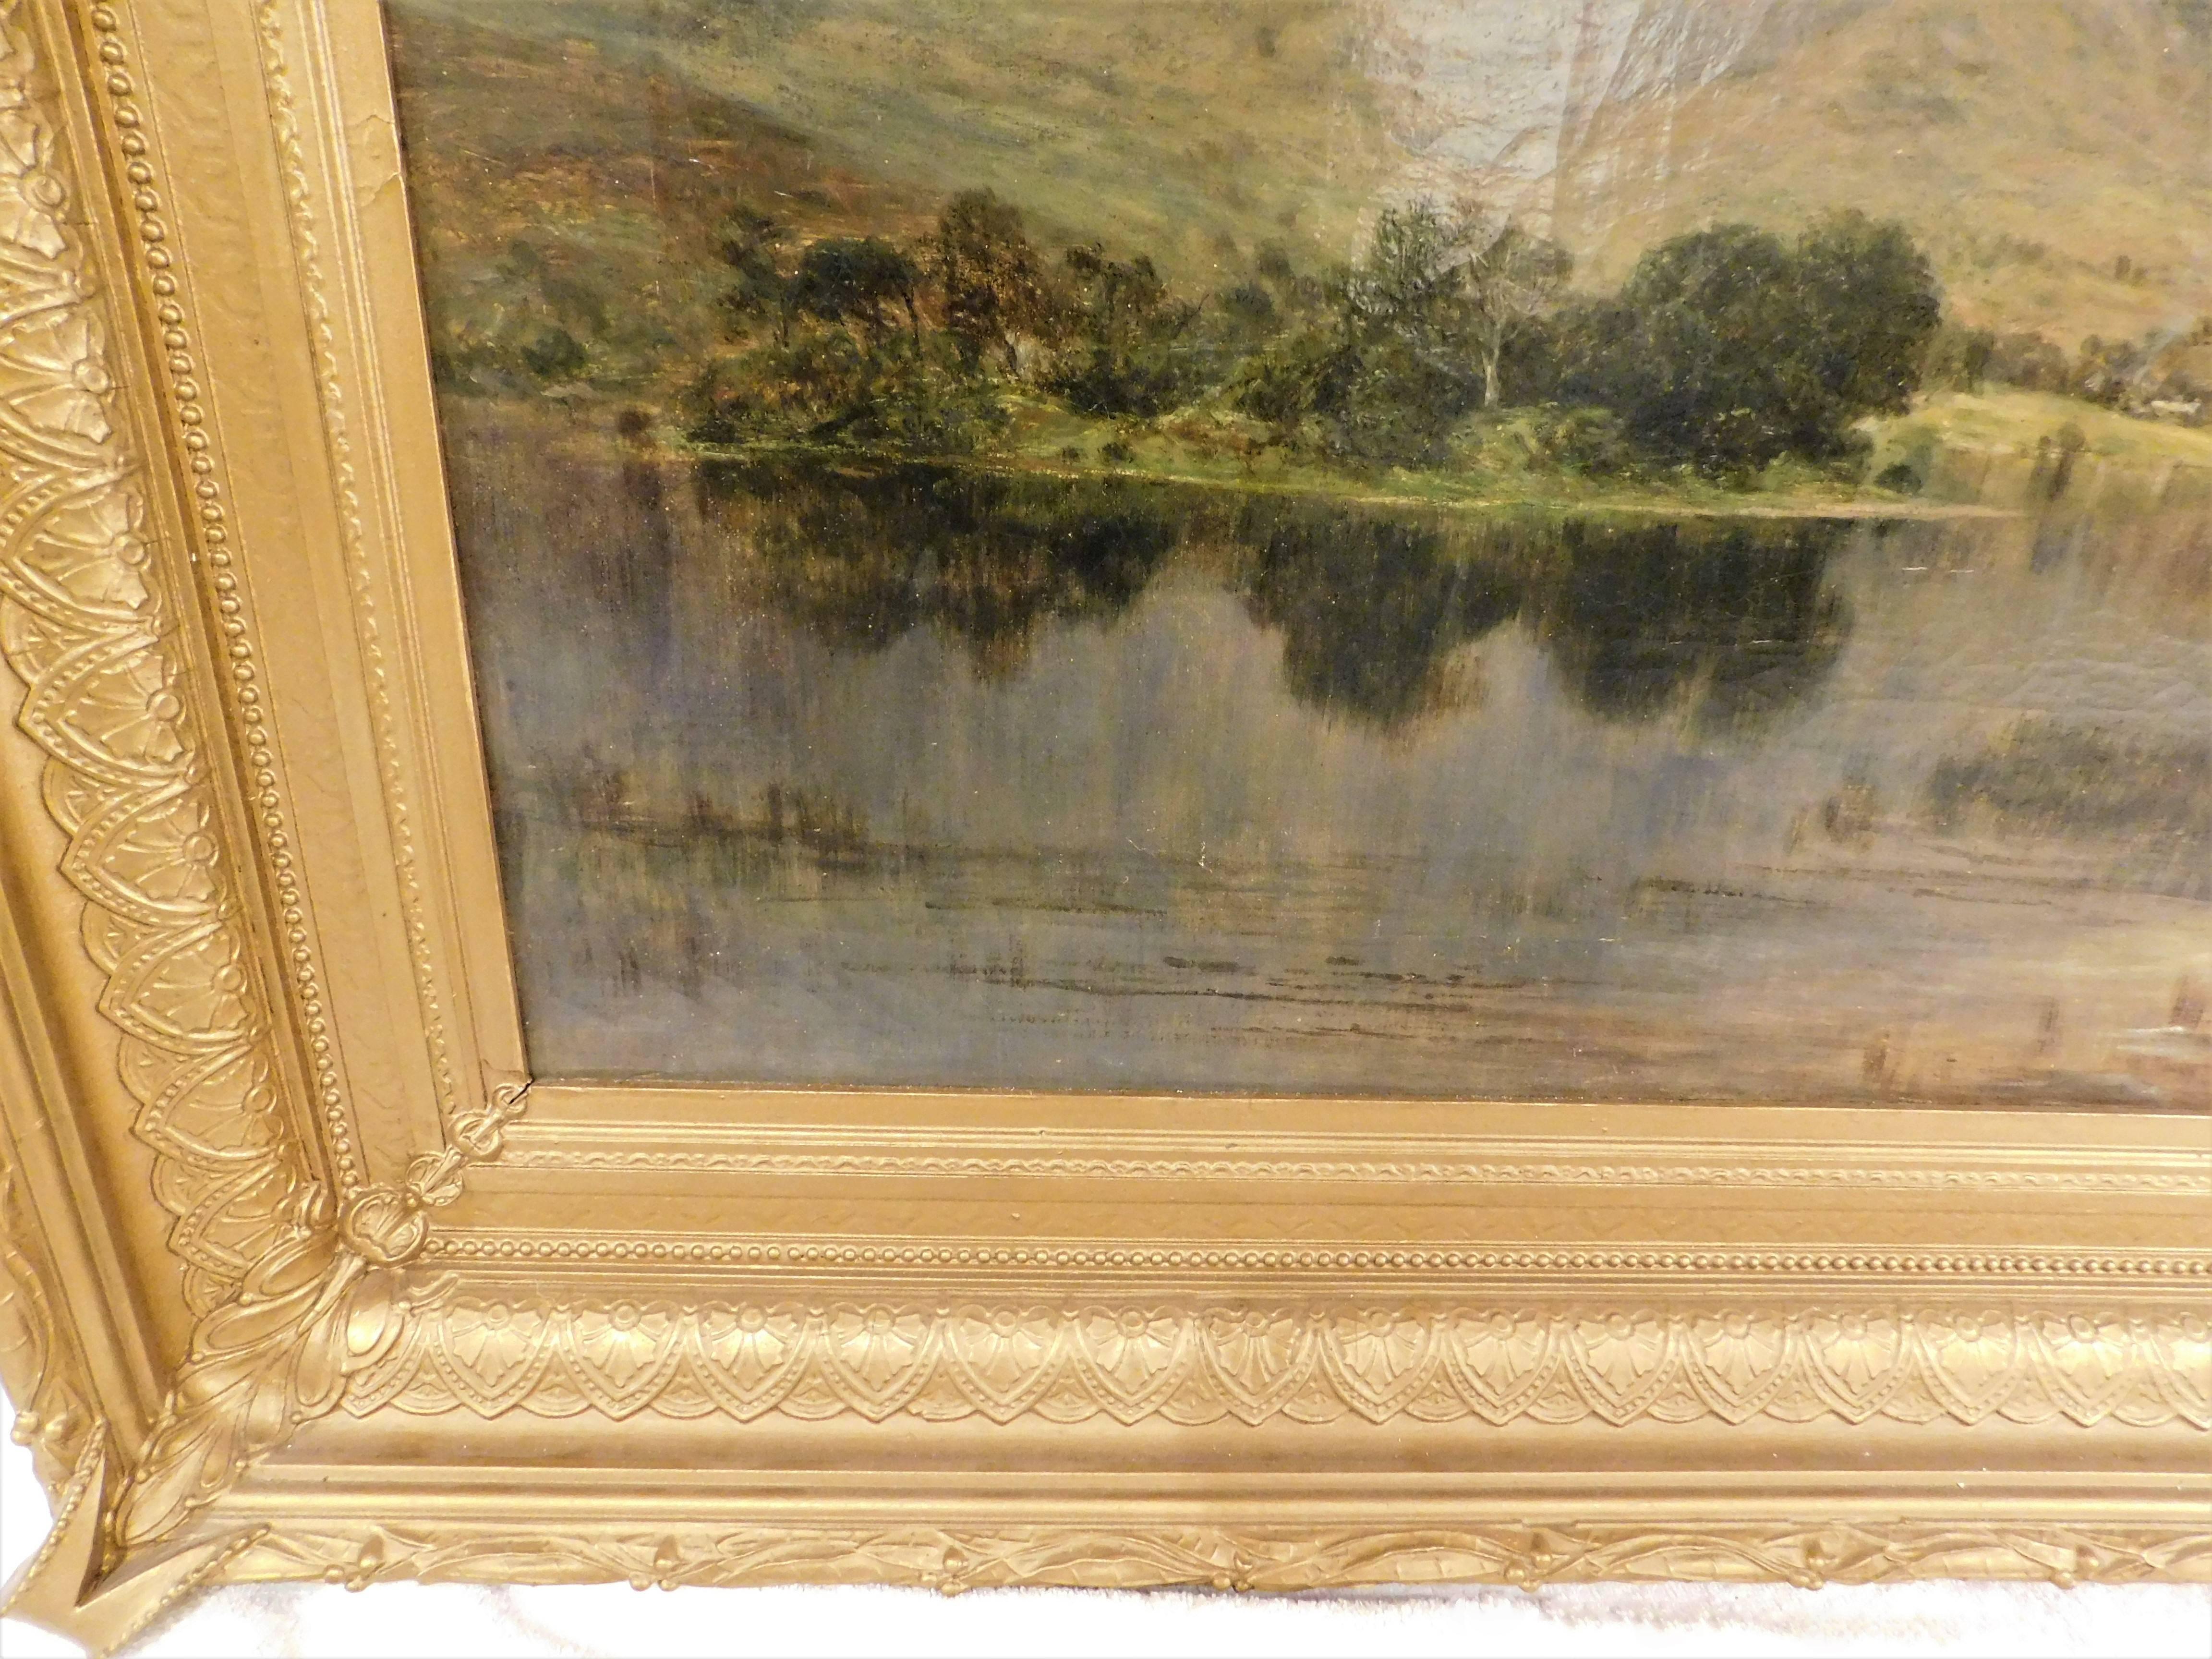 Late 19th Century James Docharty Original Oil on Canvas 1874 Landscape Painting For Sale